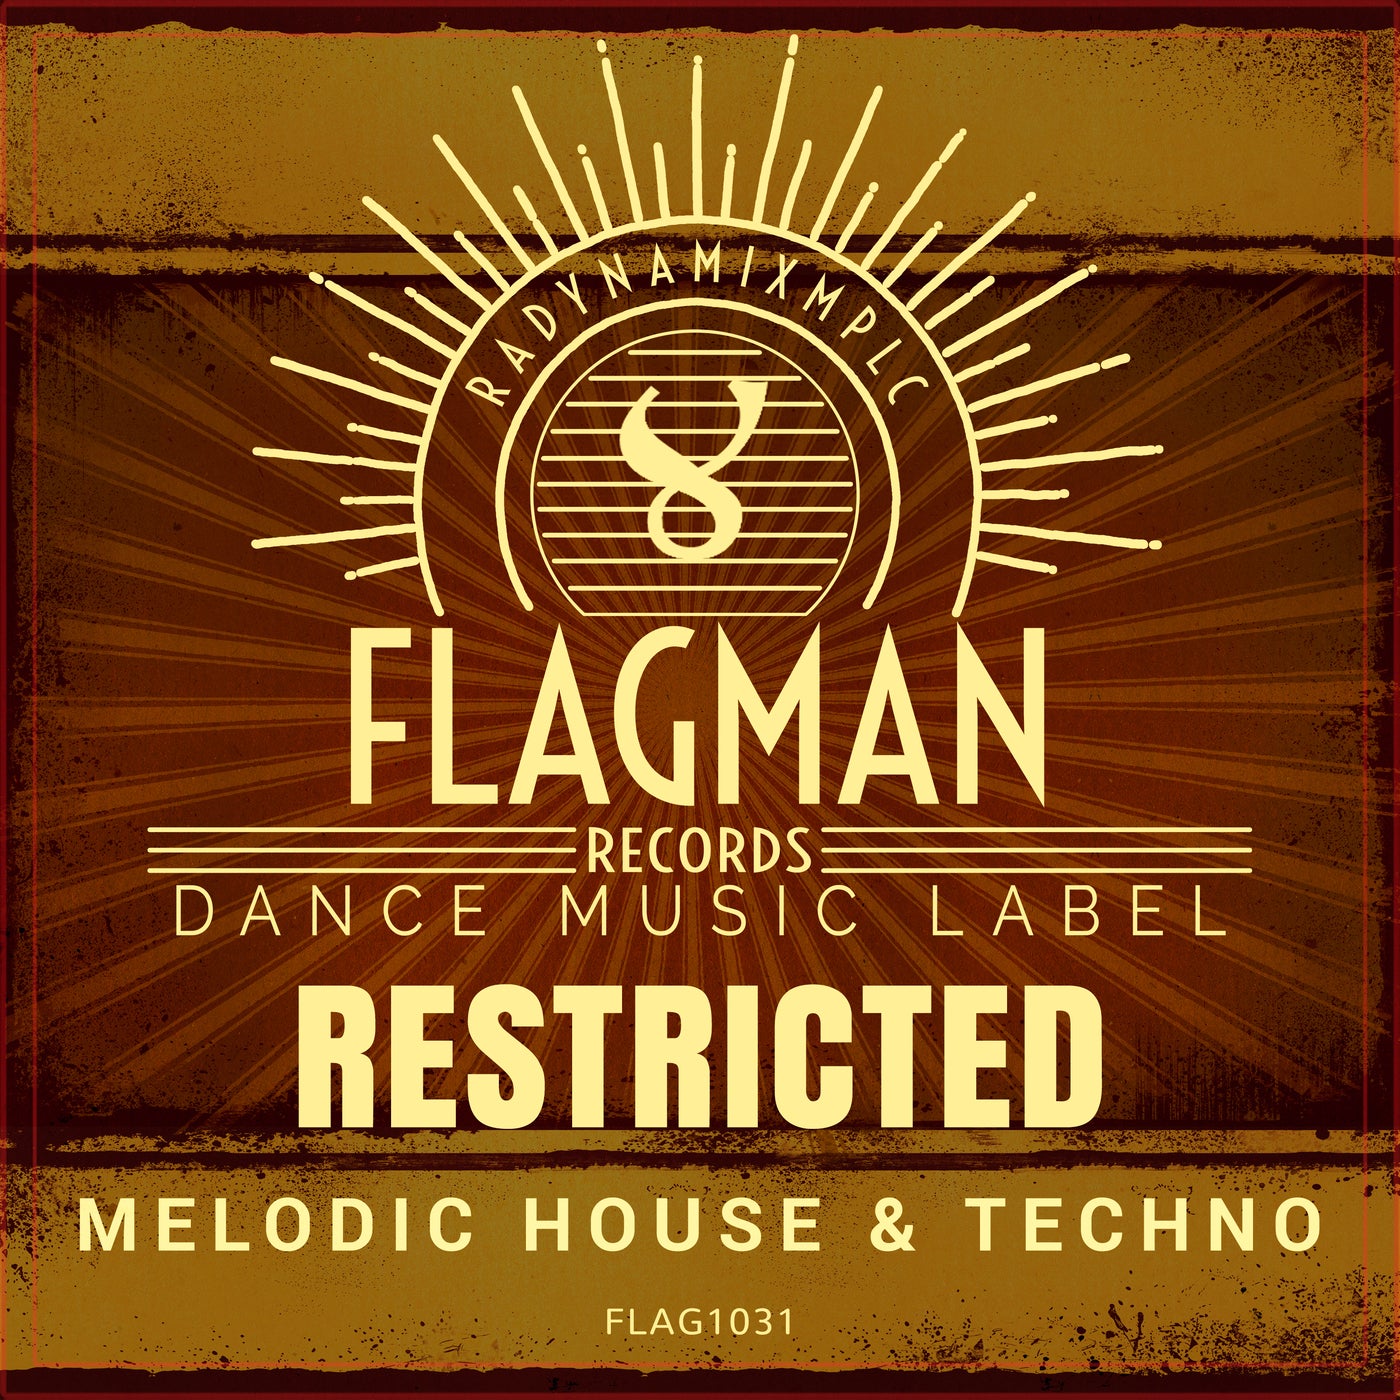 Restricted Melodic House & Techno